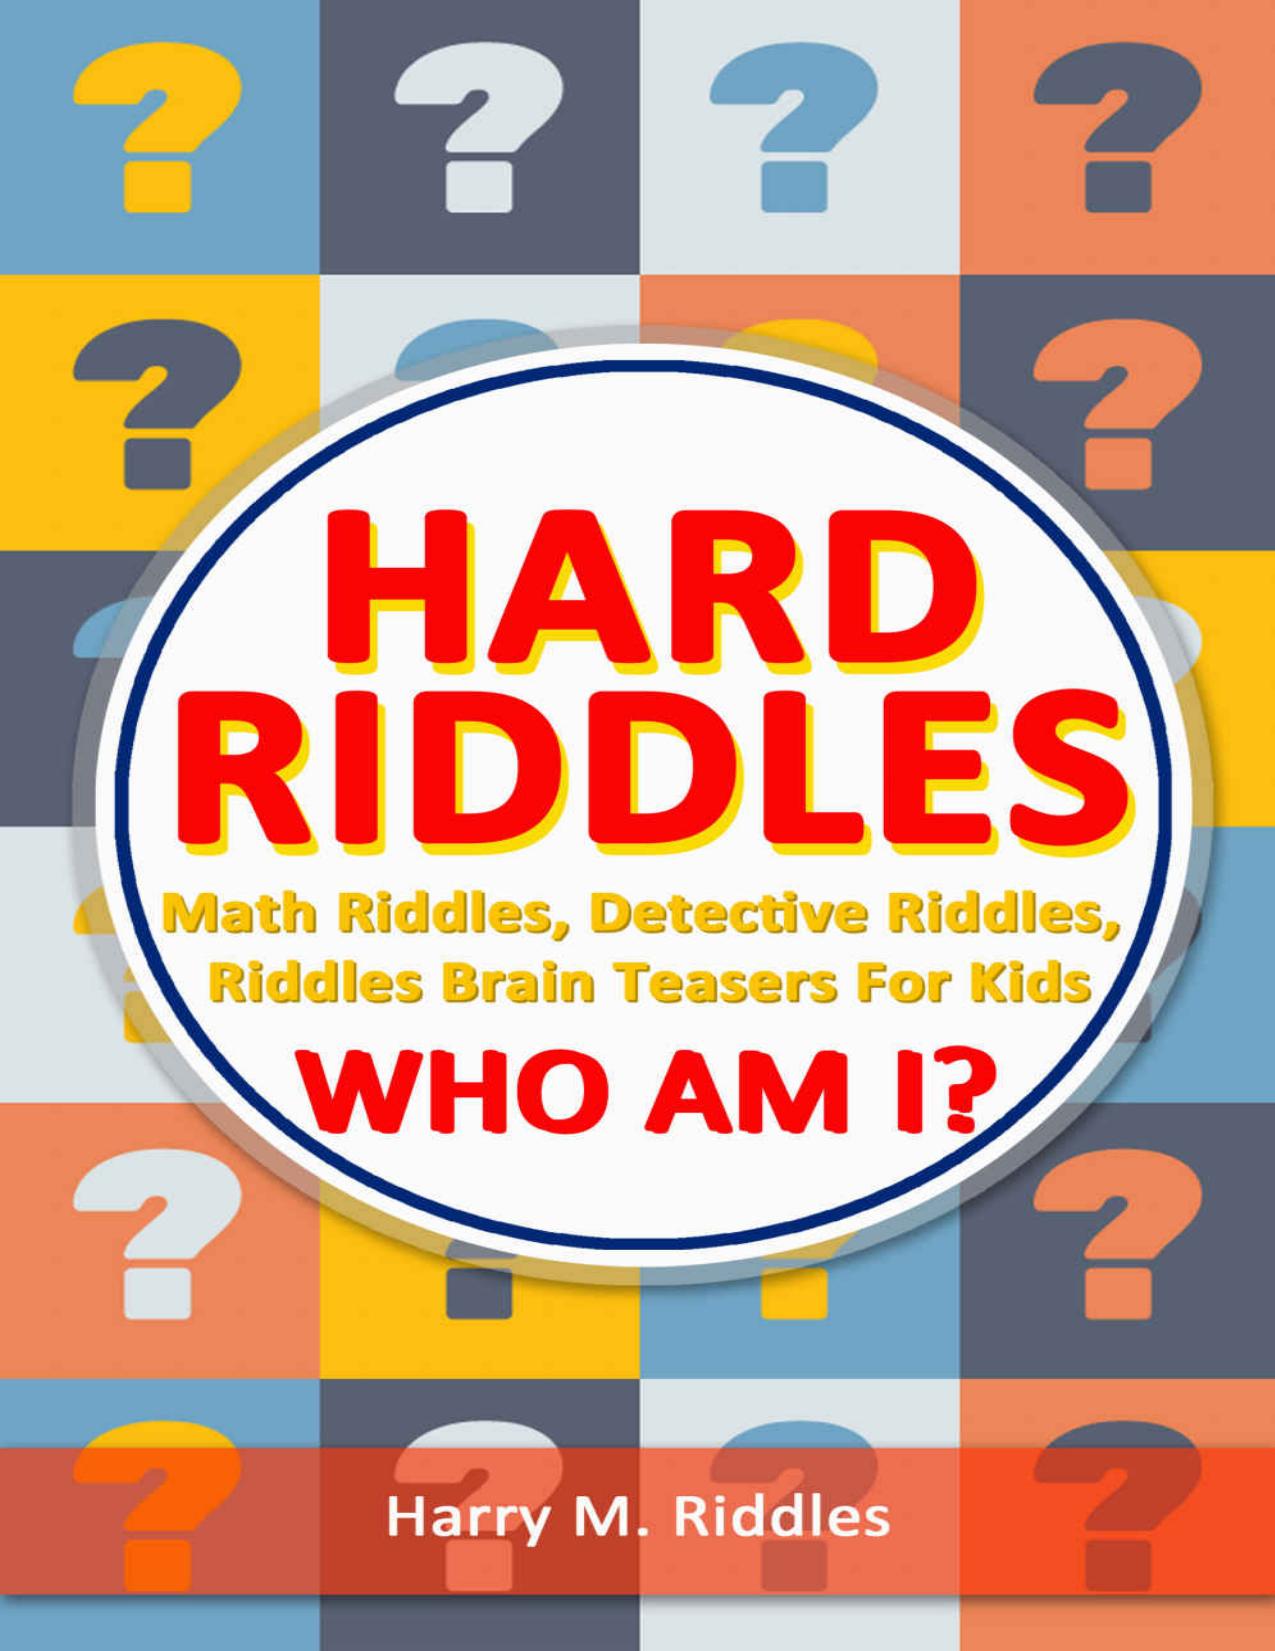 Hard Riddles: Math Riddles, Detective Riddles, Riddles Brain Teasers For Kids, Who Am I? (riddles game Book 1) by Harry M. Riddles